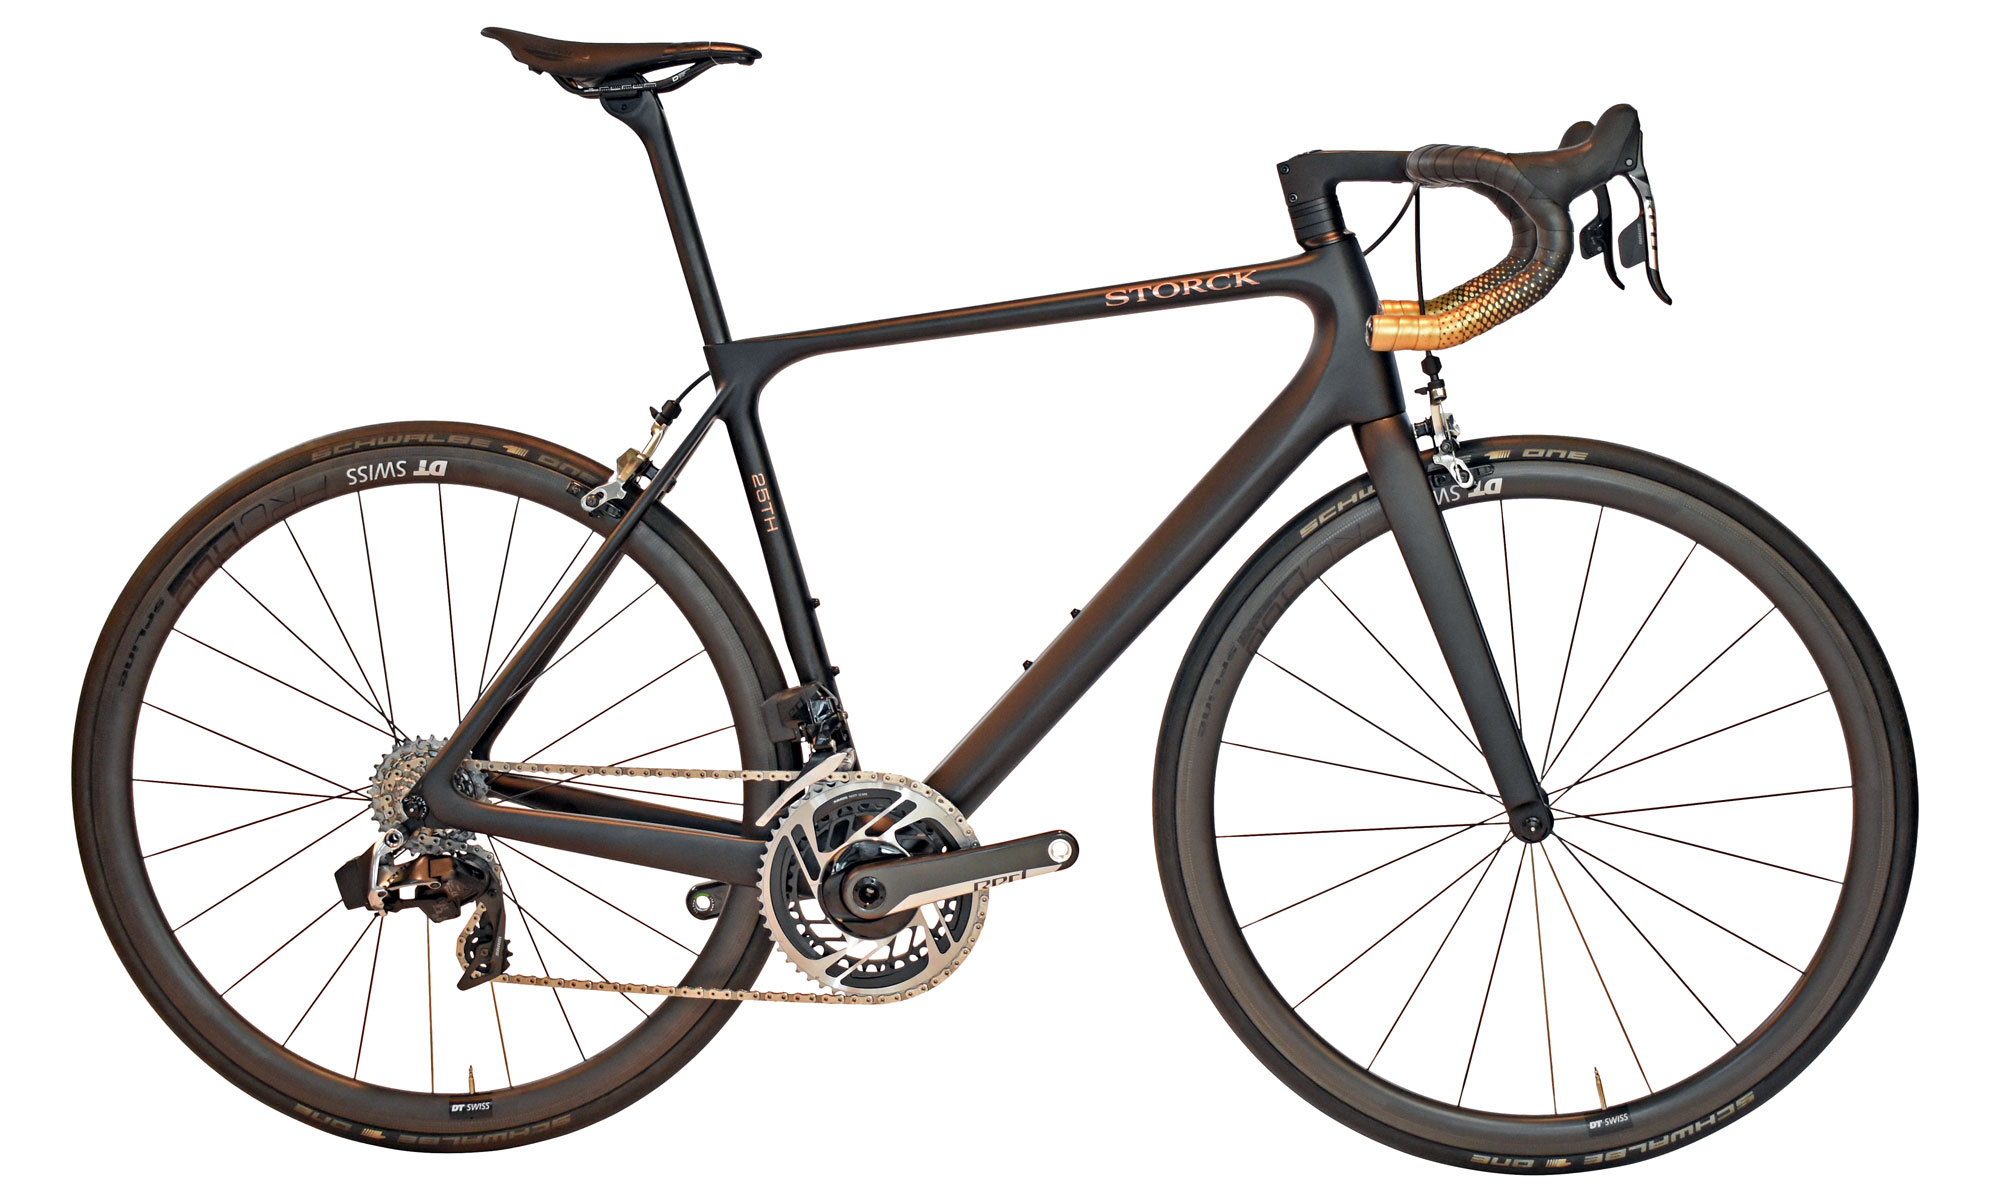 Storck Aernario.2 Signature 25th Anniversary, limited edition ultralight carbon road bike, complete